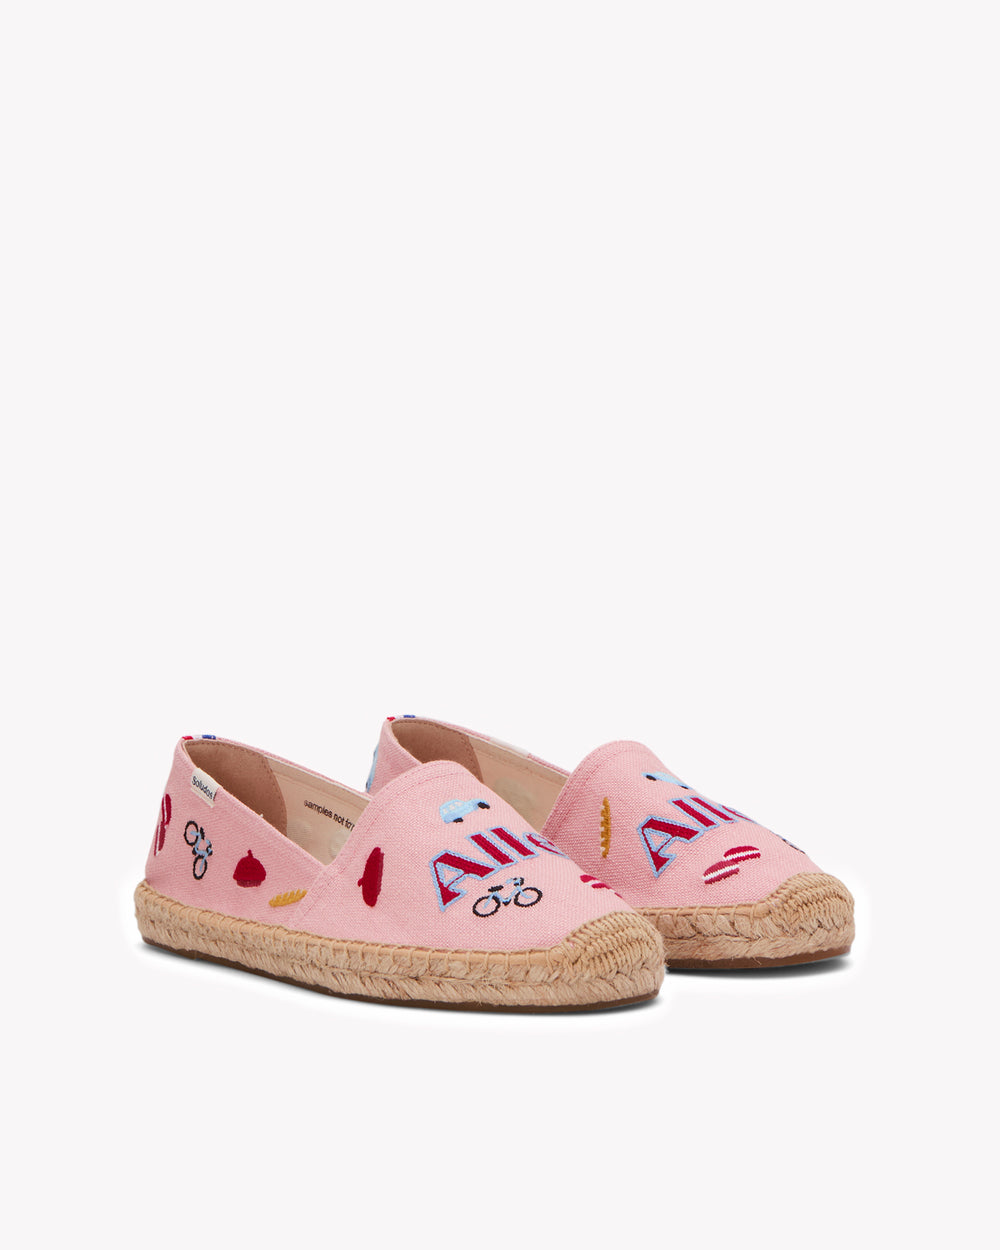 The Original Espadrille - Embroidery / France - Rosa Pink - Women's